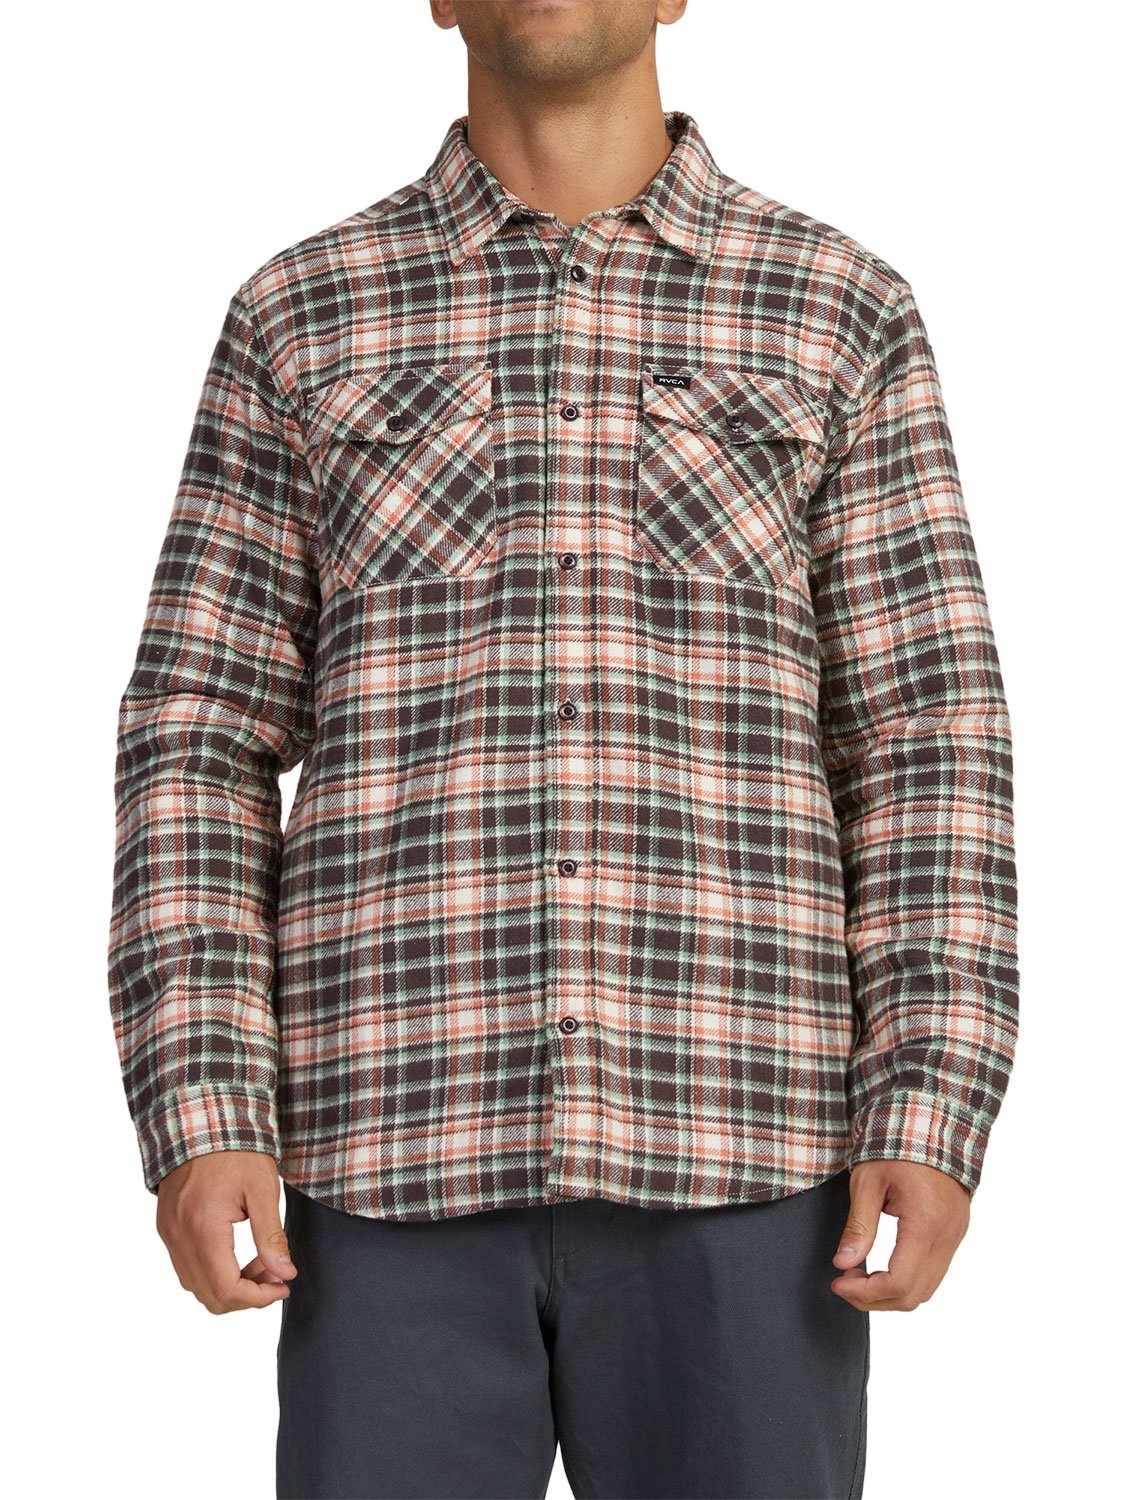 RVCA Men's Replacement Lined Shirt